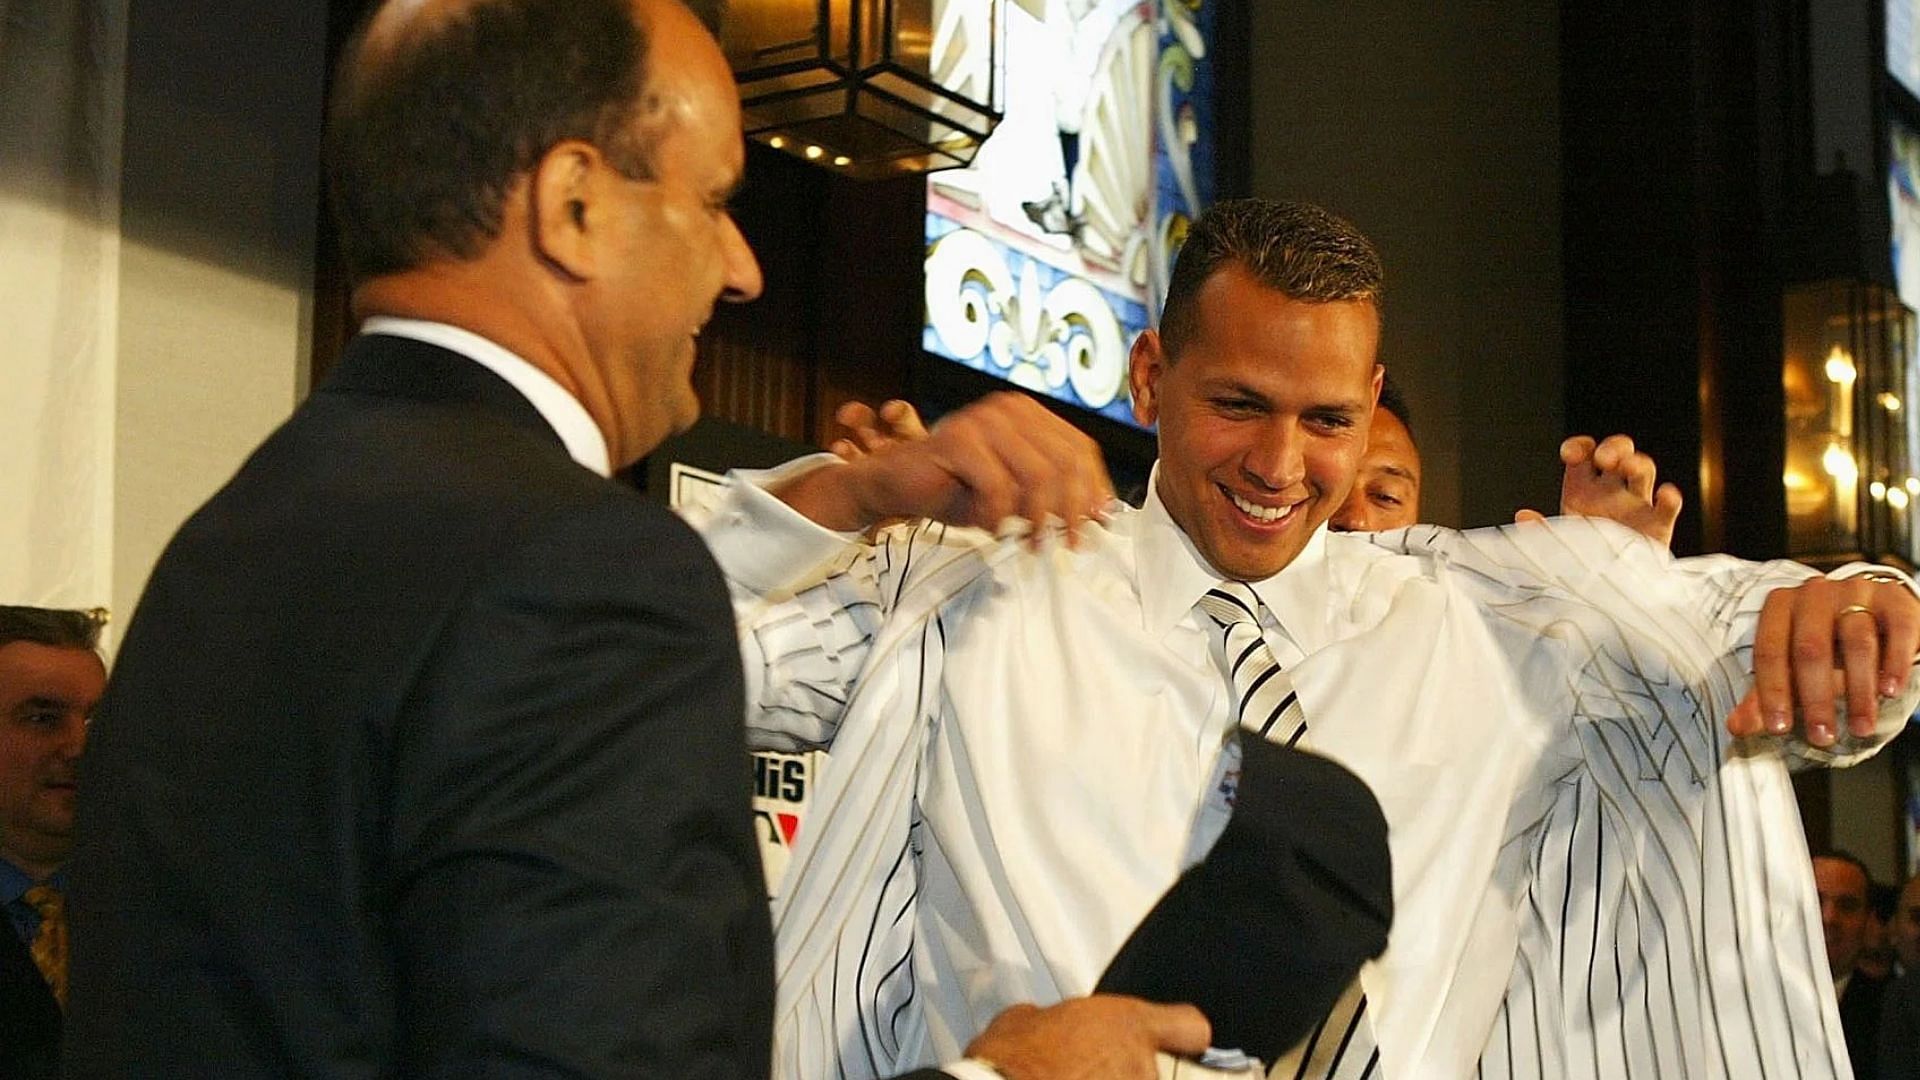 NEW YORK - FEBRUARY 17: Manager Joe Torre (L) and Derek Jeter help Alex Rodriguez (C) put on his pin strips at a press conference that announced Rodriguez as the newest New York Yankee on February 17, 2004 at Yankee Stadium in the Bronx, New York. (Photo by Ezra Shaw/Getty Images)